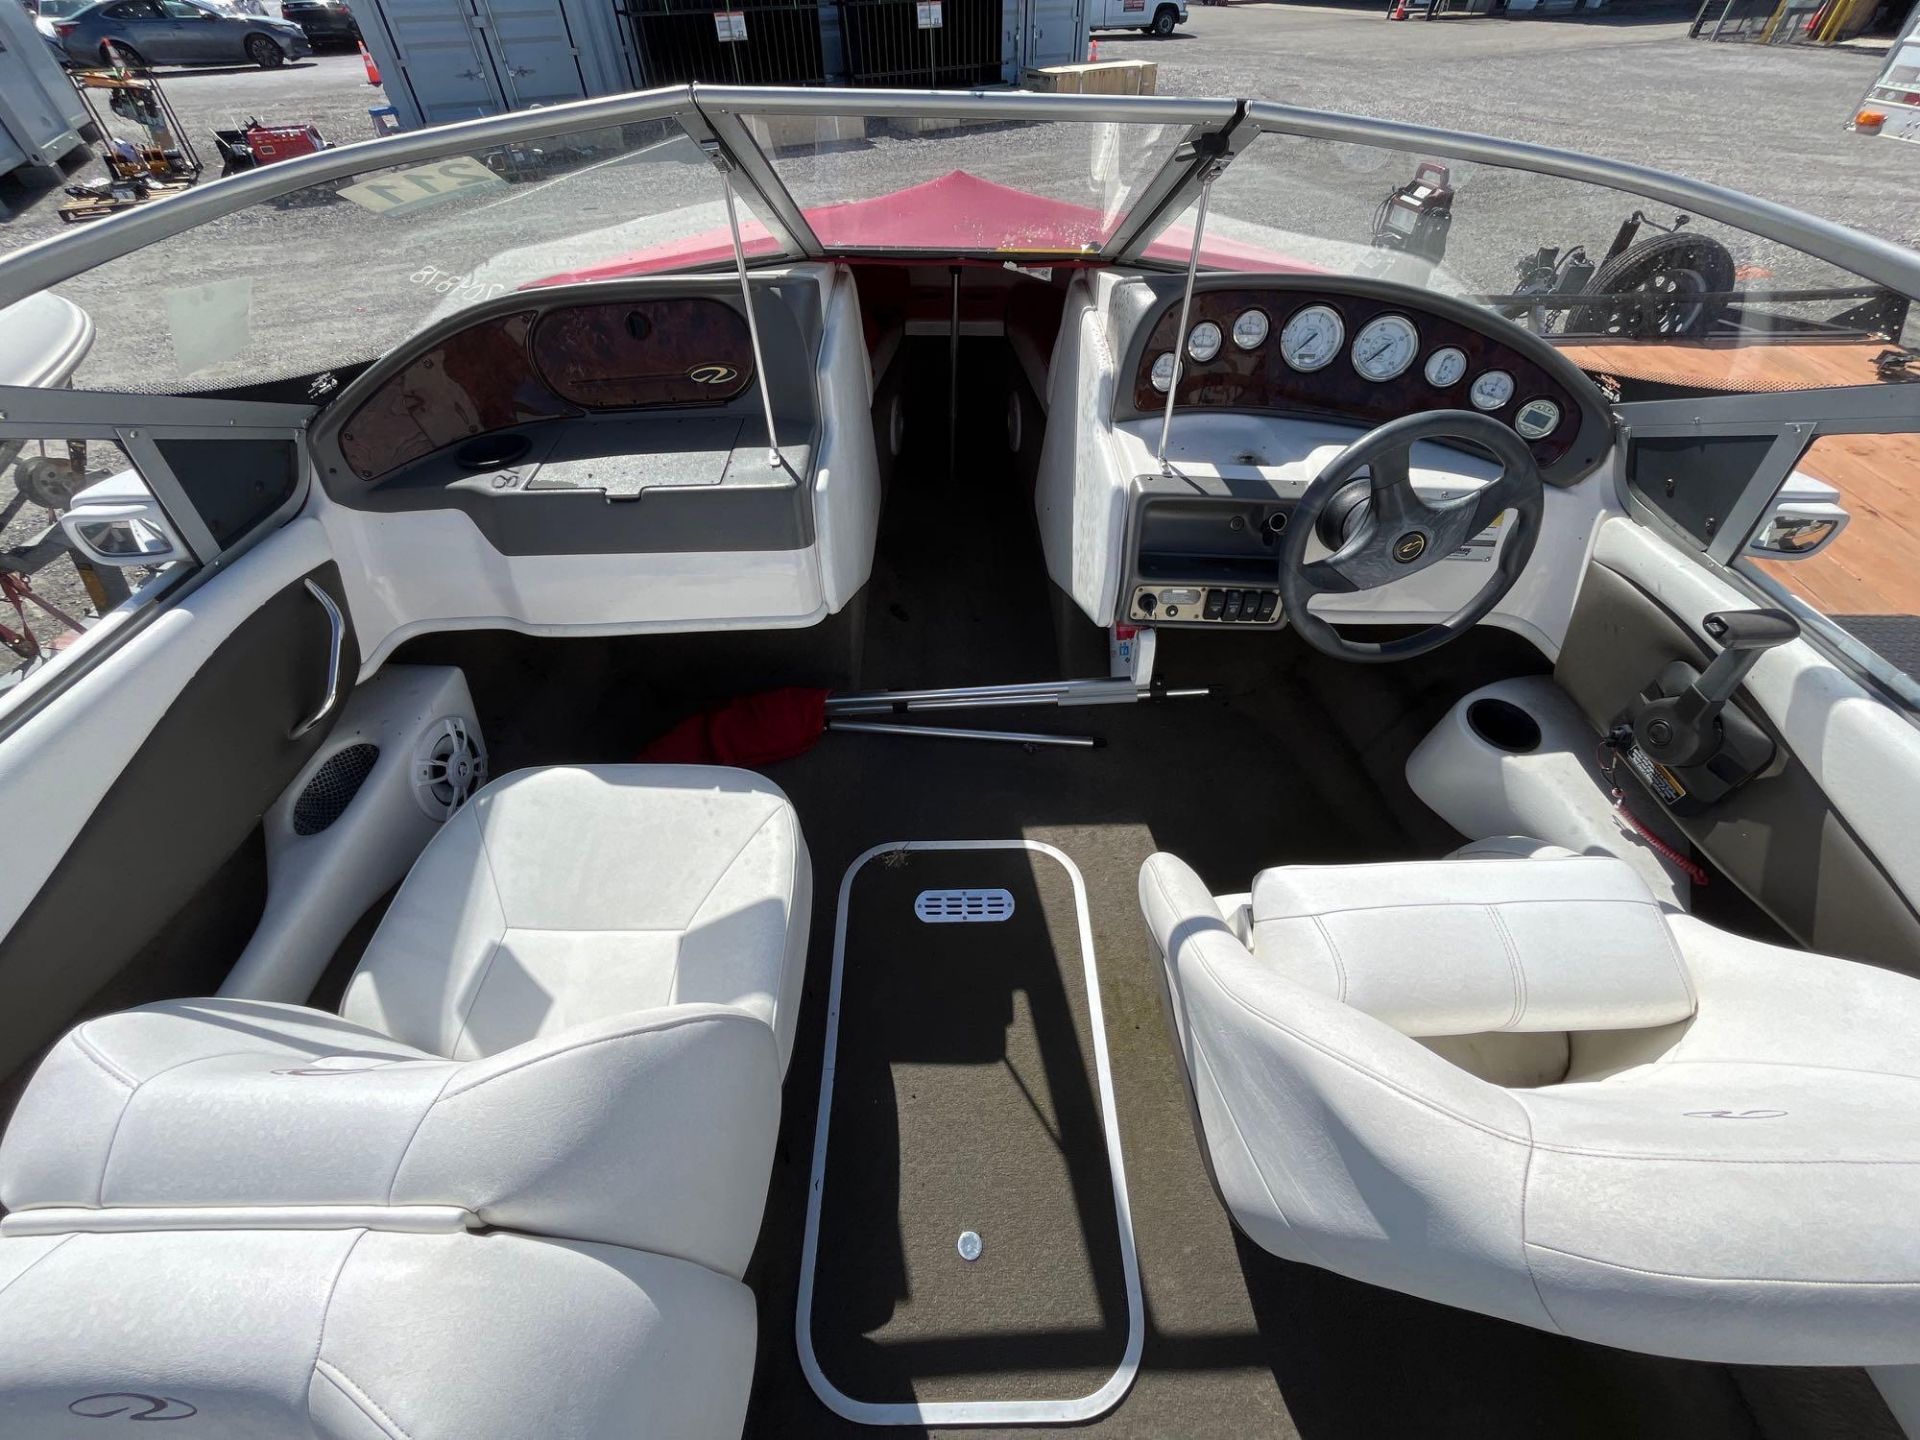 2005 Regal 1800 Boat And Marine Trailer - Image 13 of 16